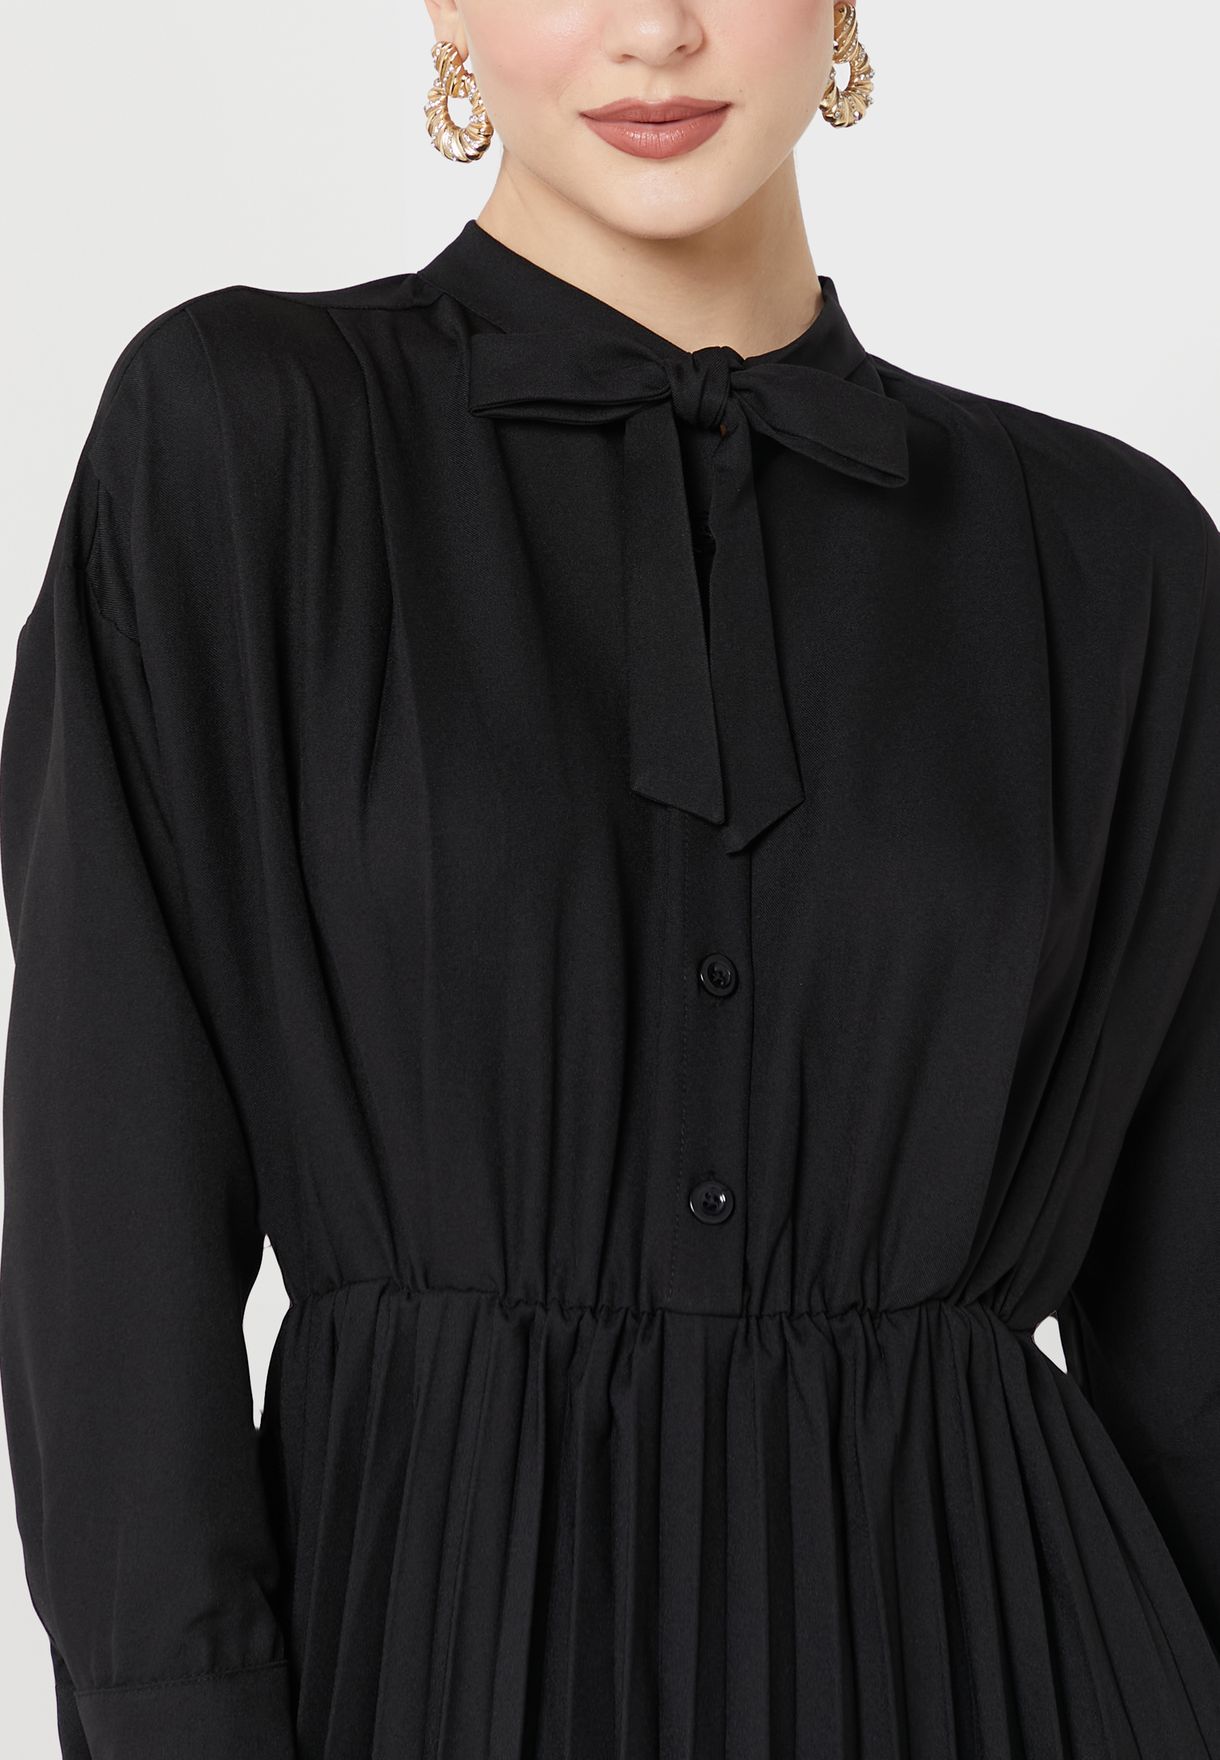 Pleated Effect Solid Dress